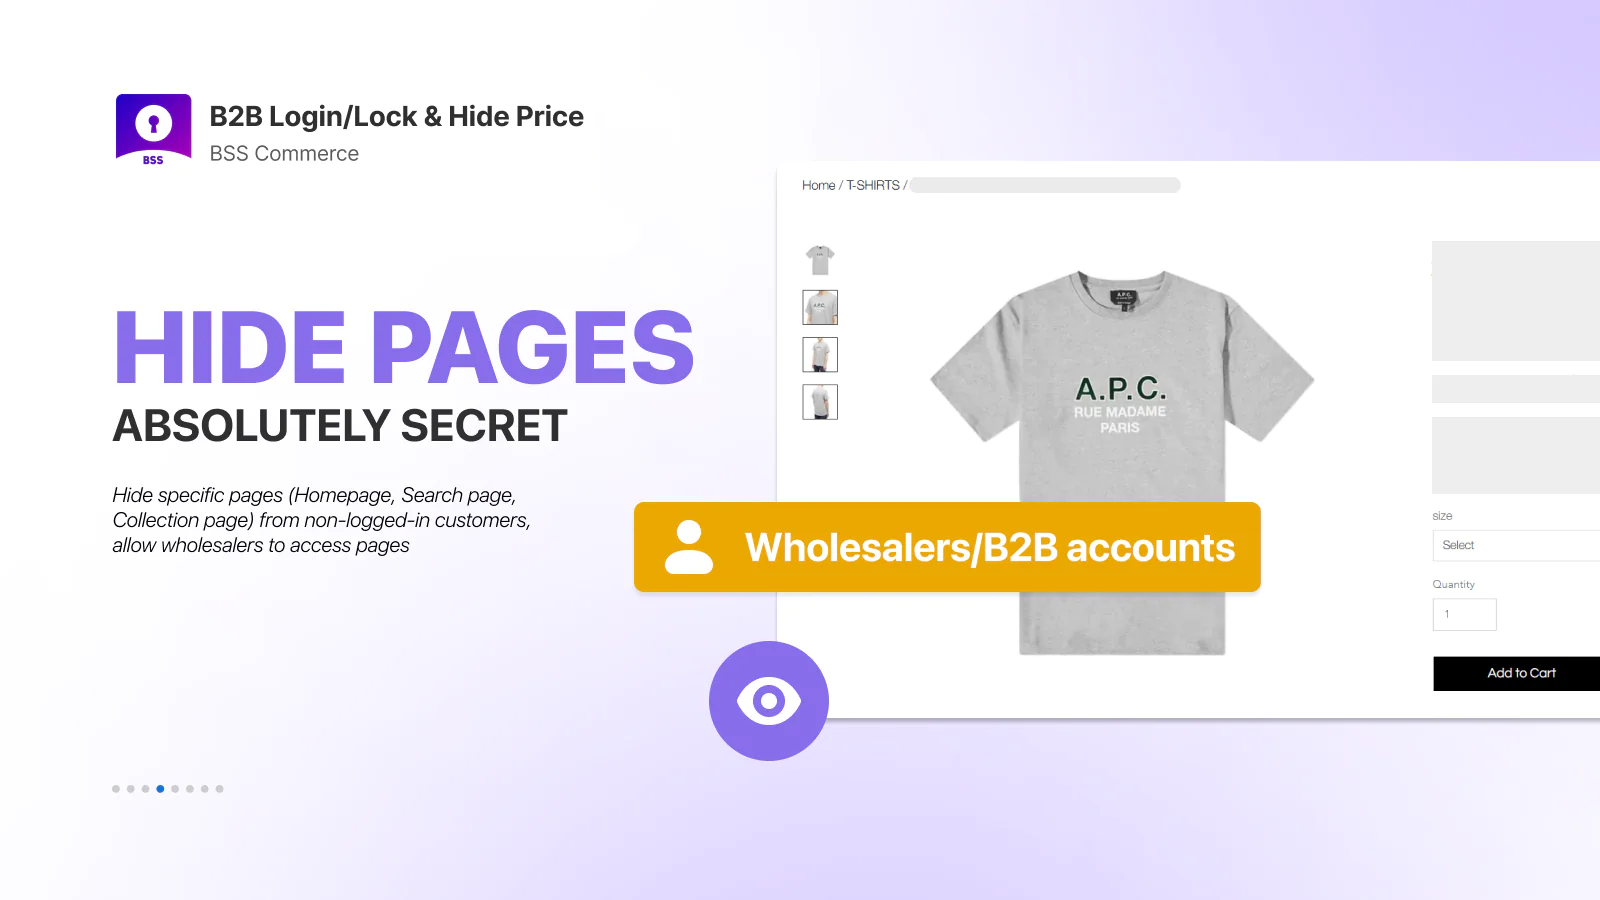 bss-b2b-lock-and-hide-price-hide-pages